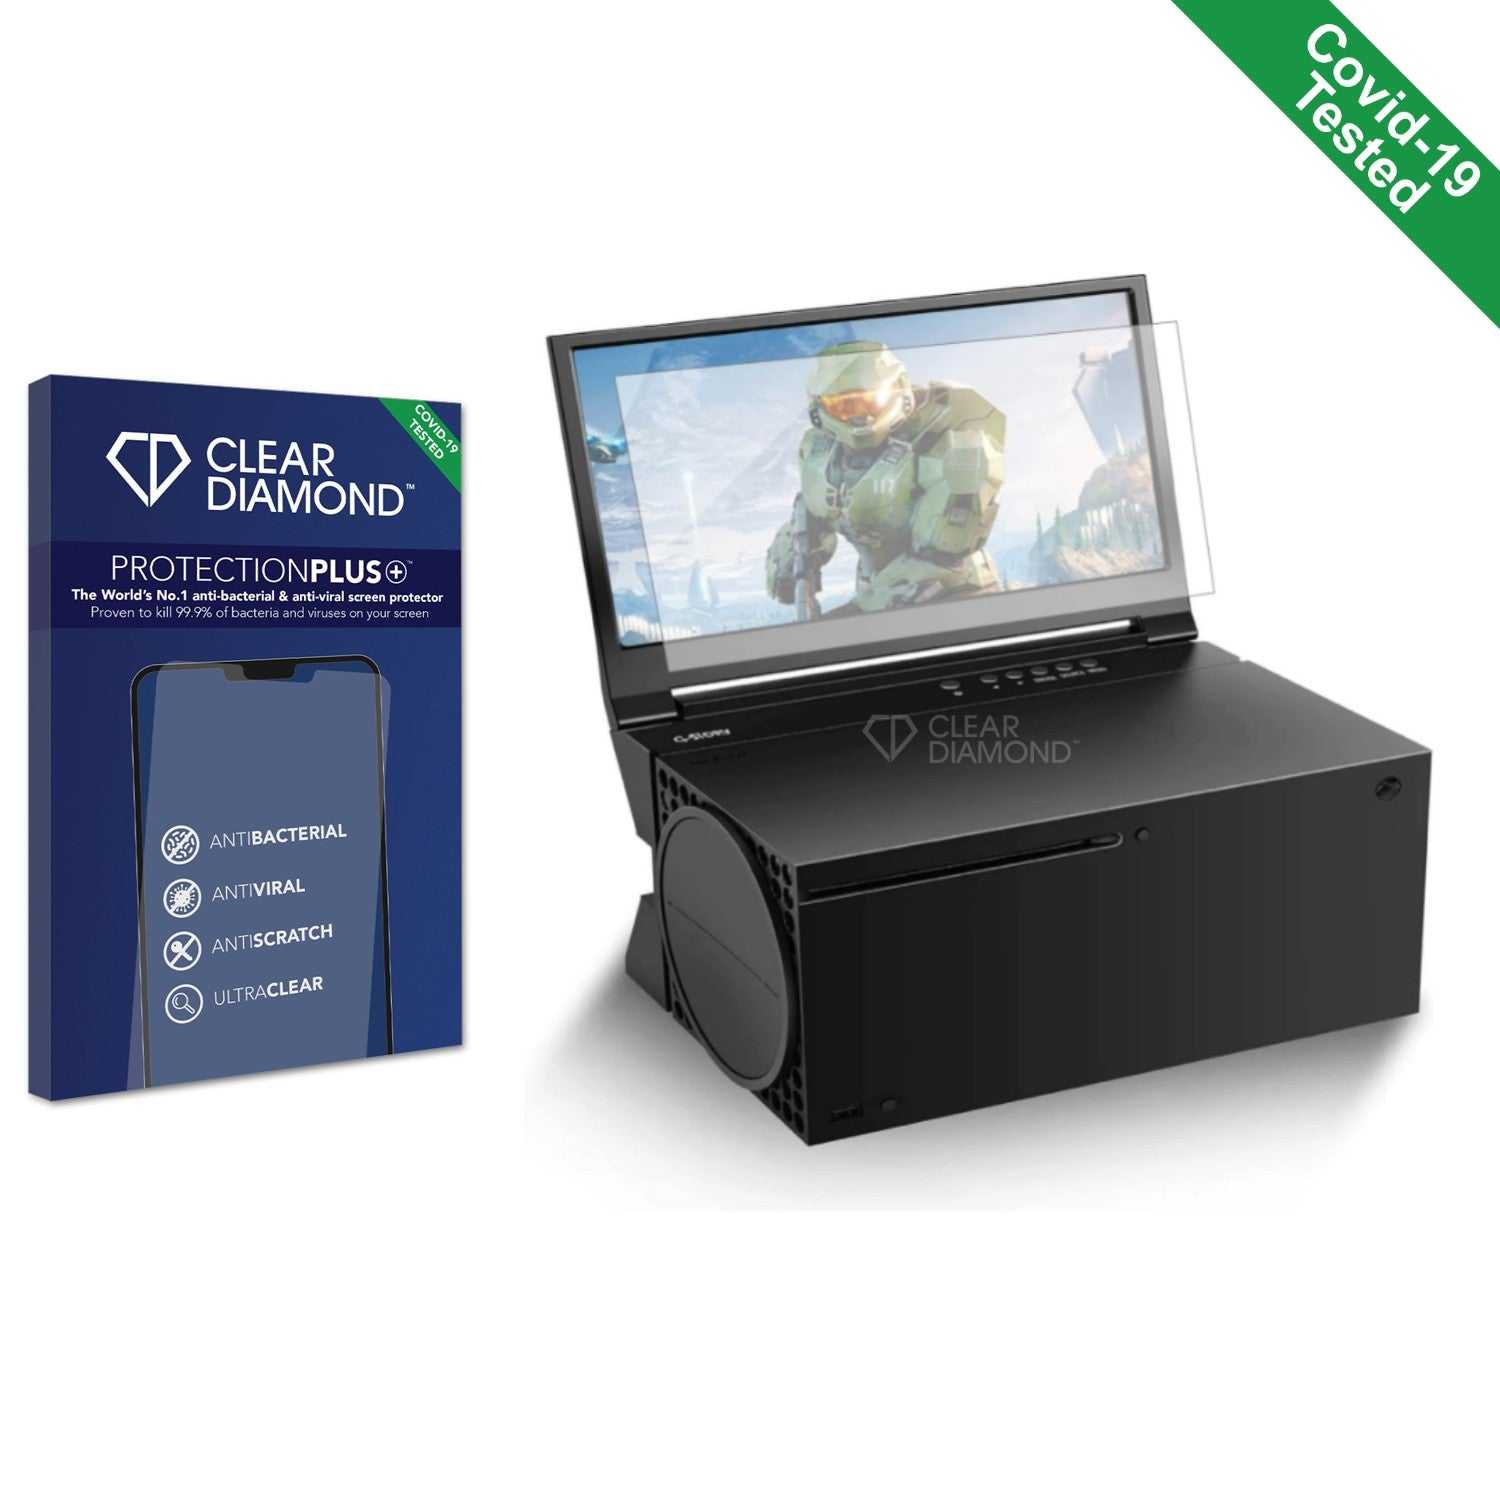 ScreenShield, Clear Diamond Anti-viral Screen Protector for G-STORY 12.5" Portable Monitor